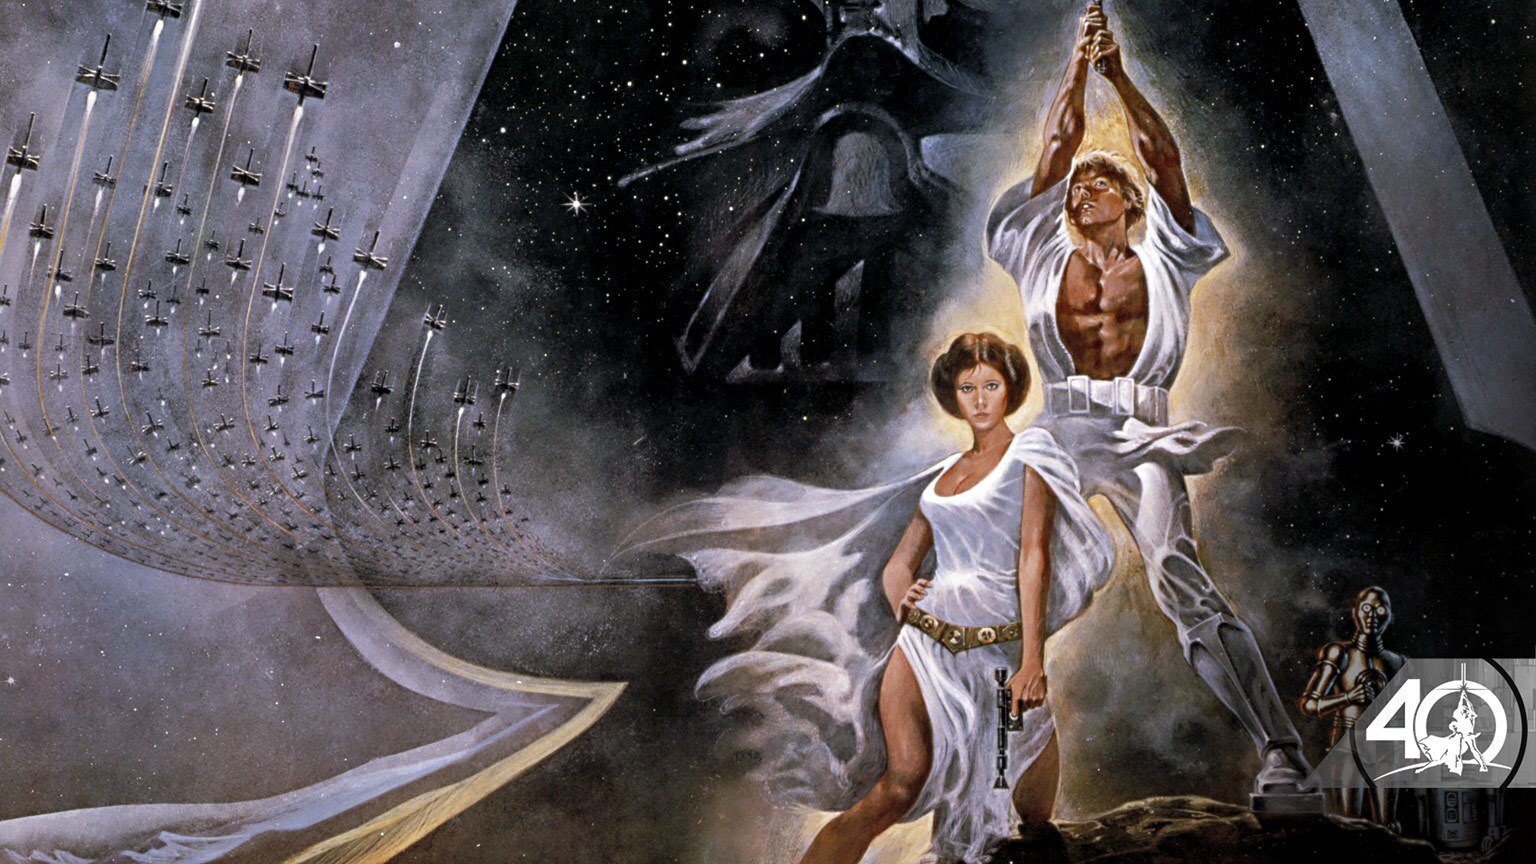 Wars 40 | 7 Things You Didn't Know About the Original Star Wars Poster | StarWars.com